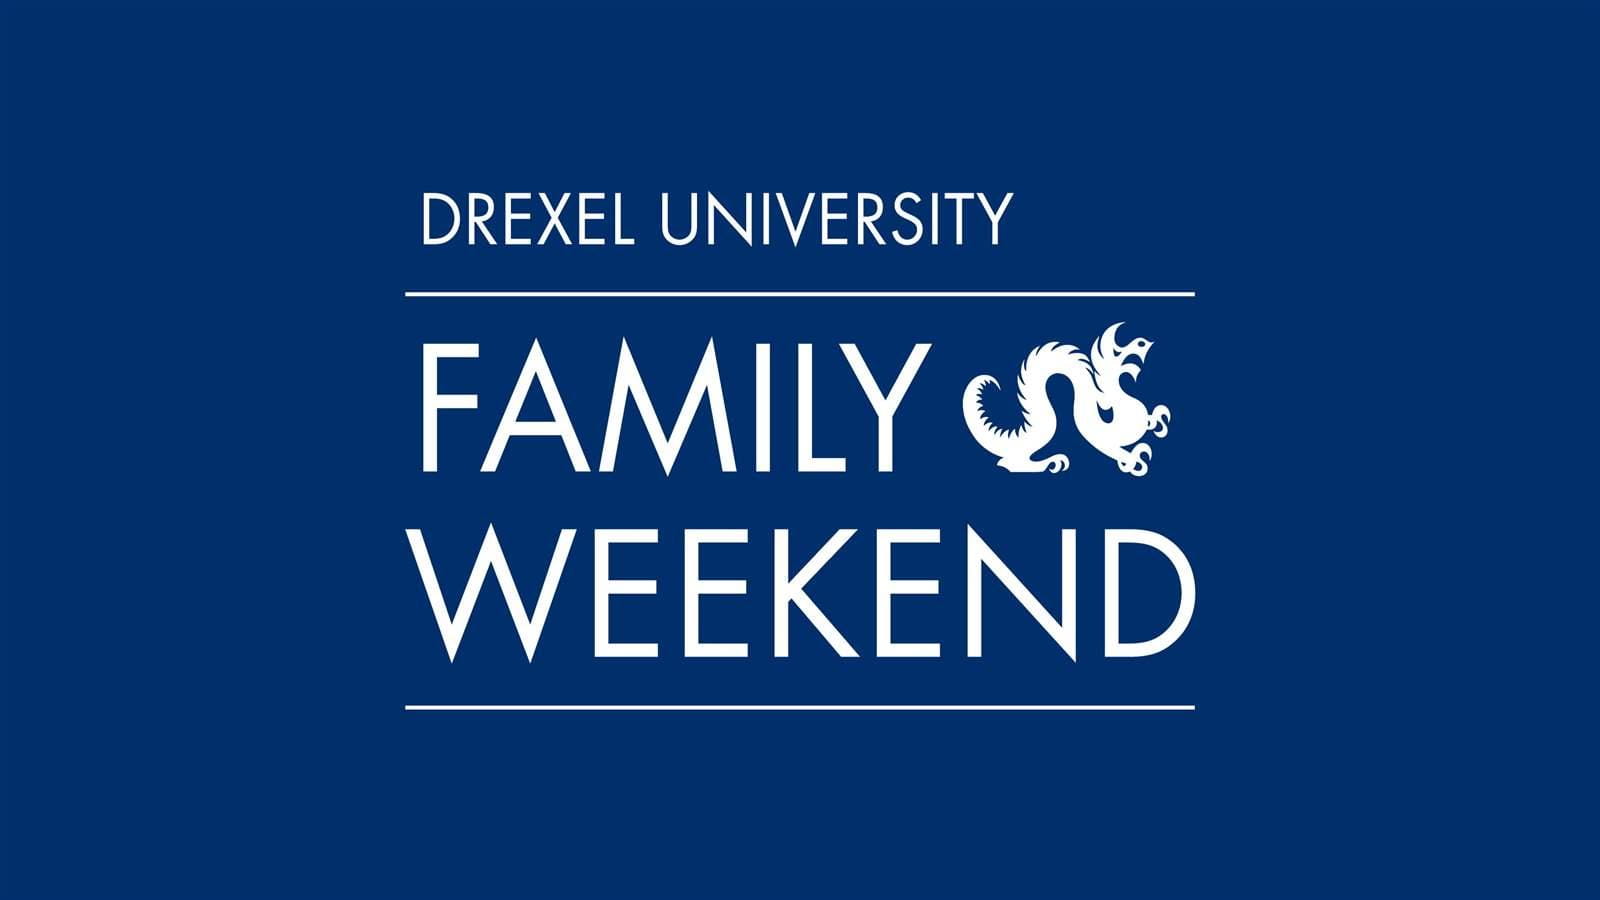 Family weekend